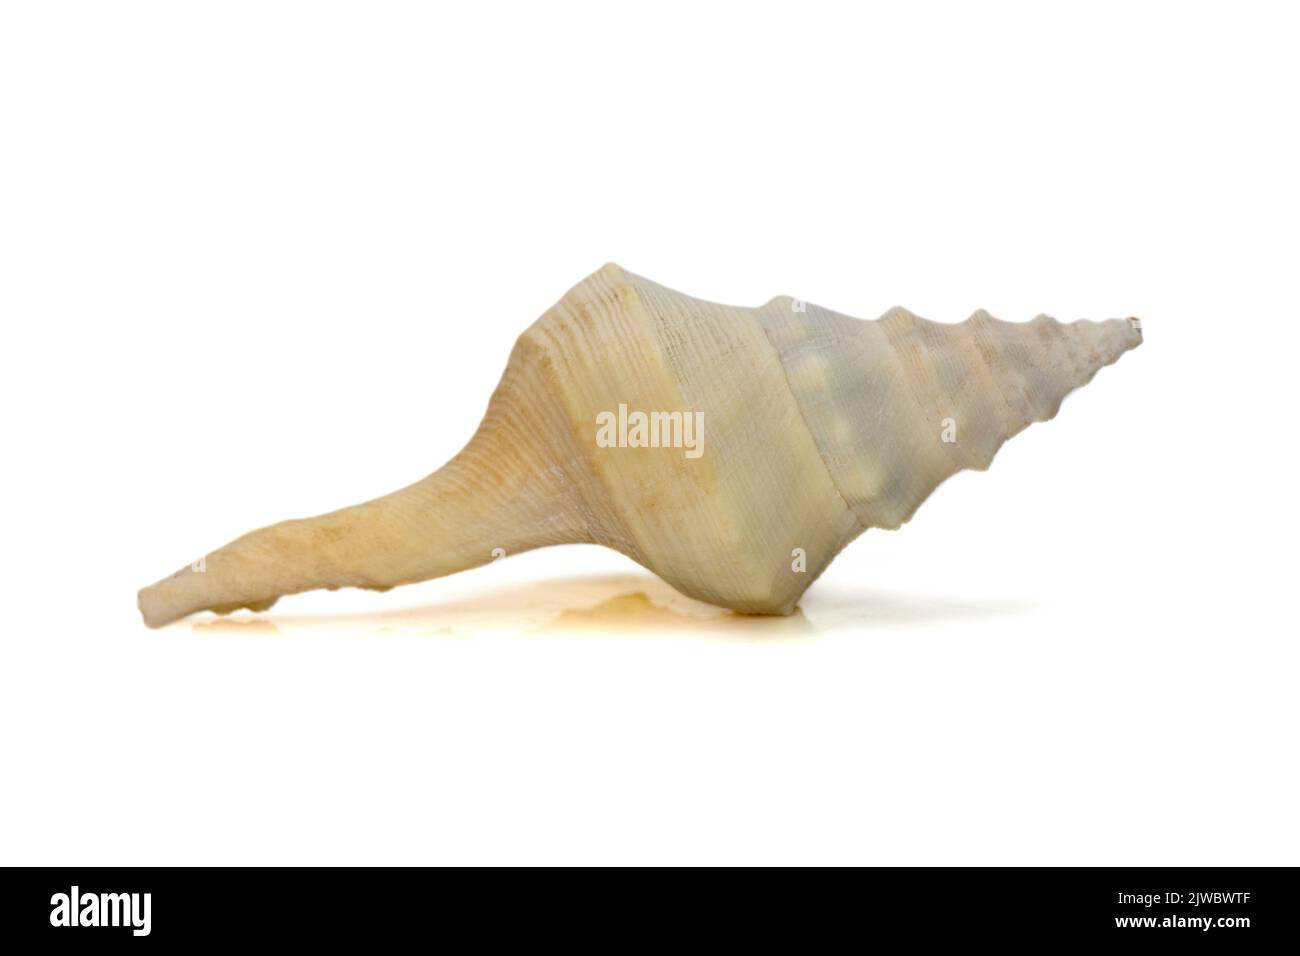 images of white conch shell isolated on white background. Undersea Animals. Sea Shells. Stock Photo